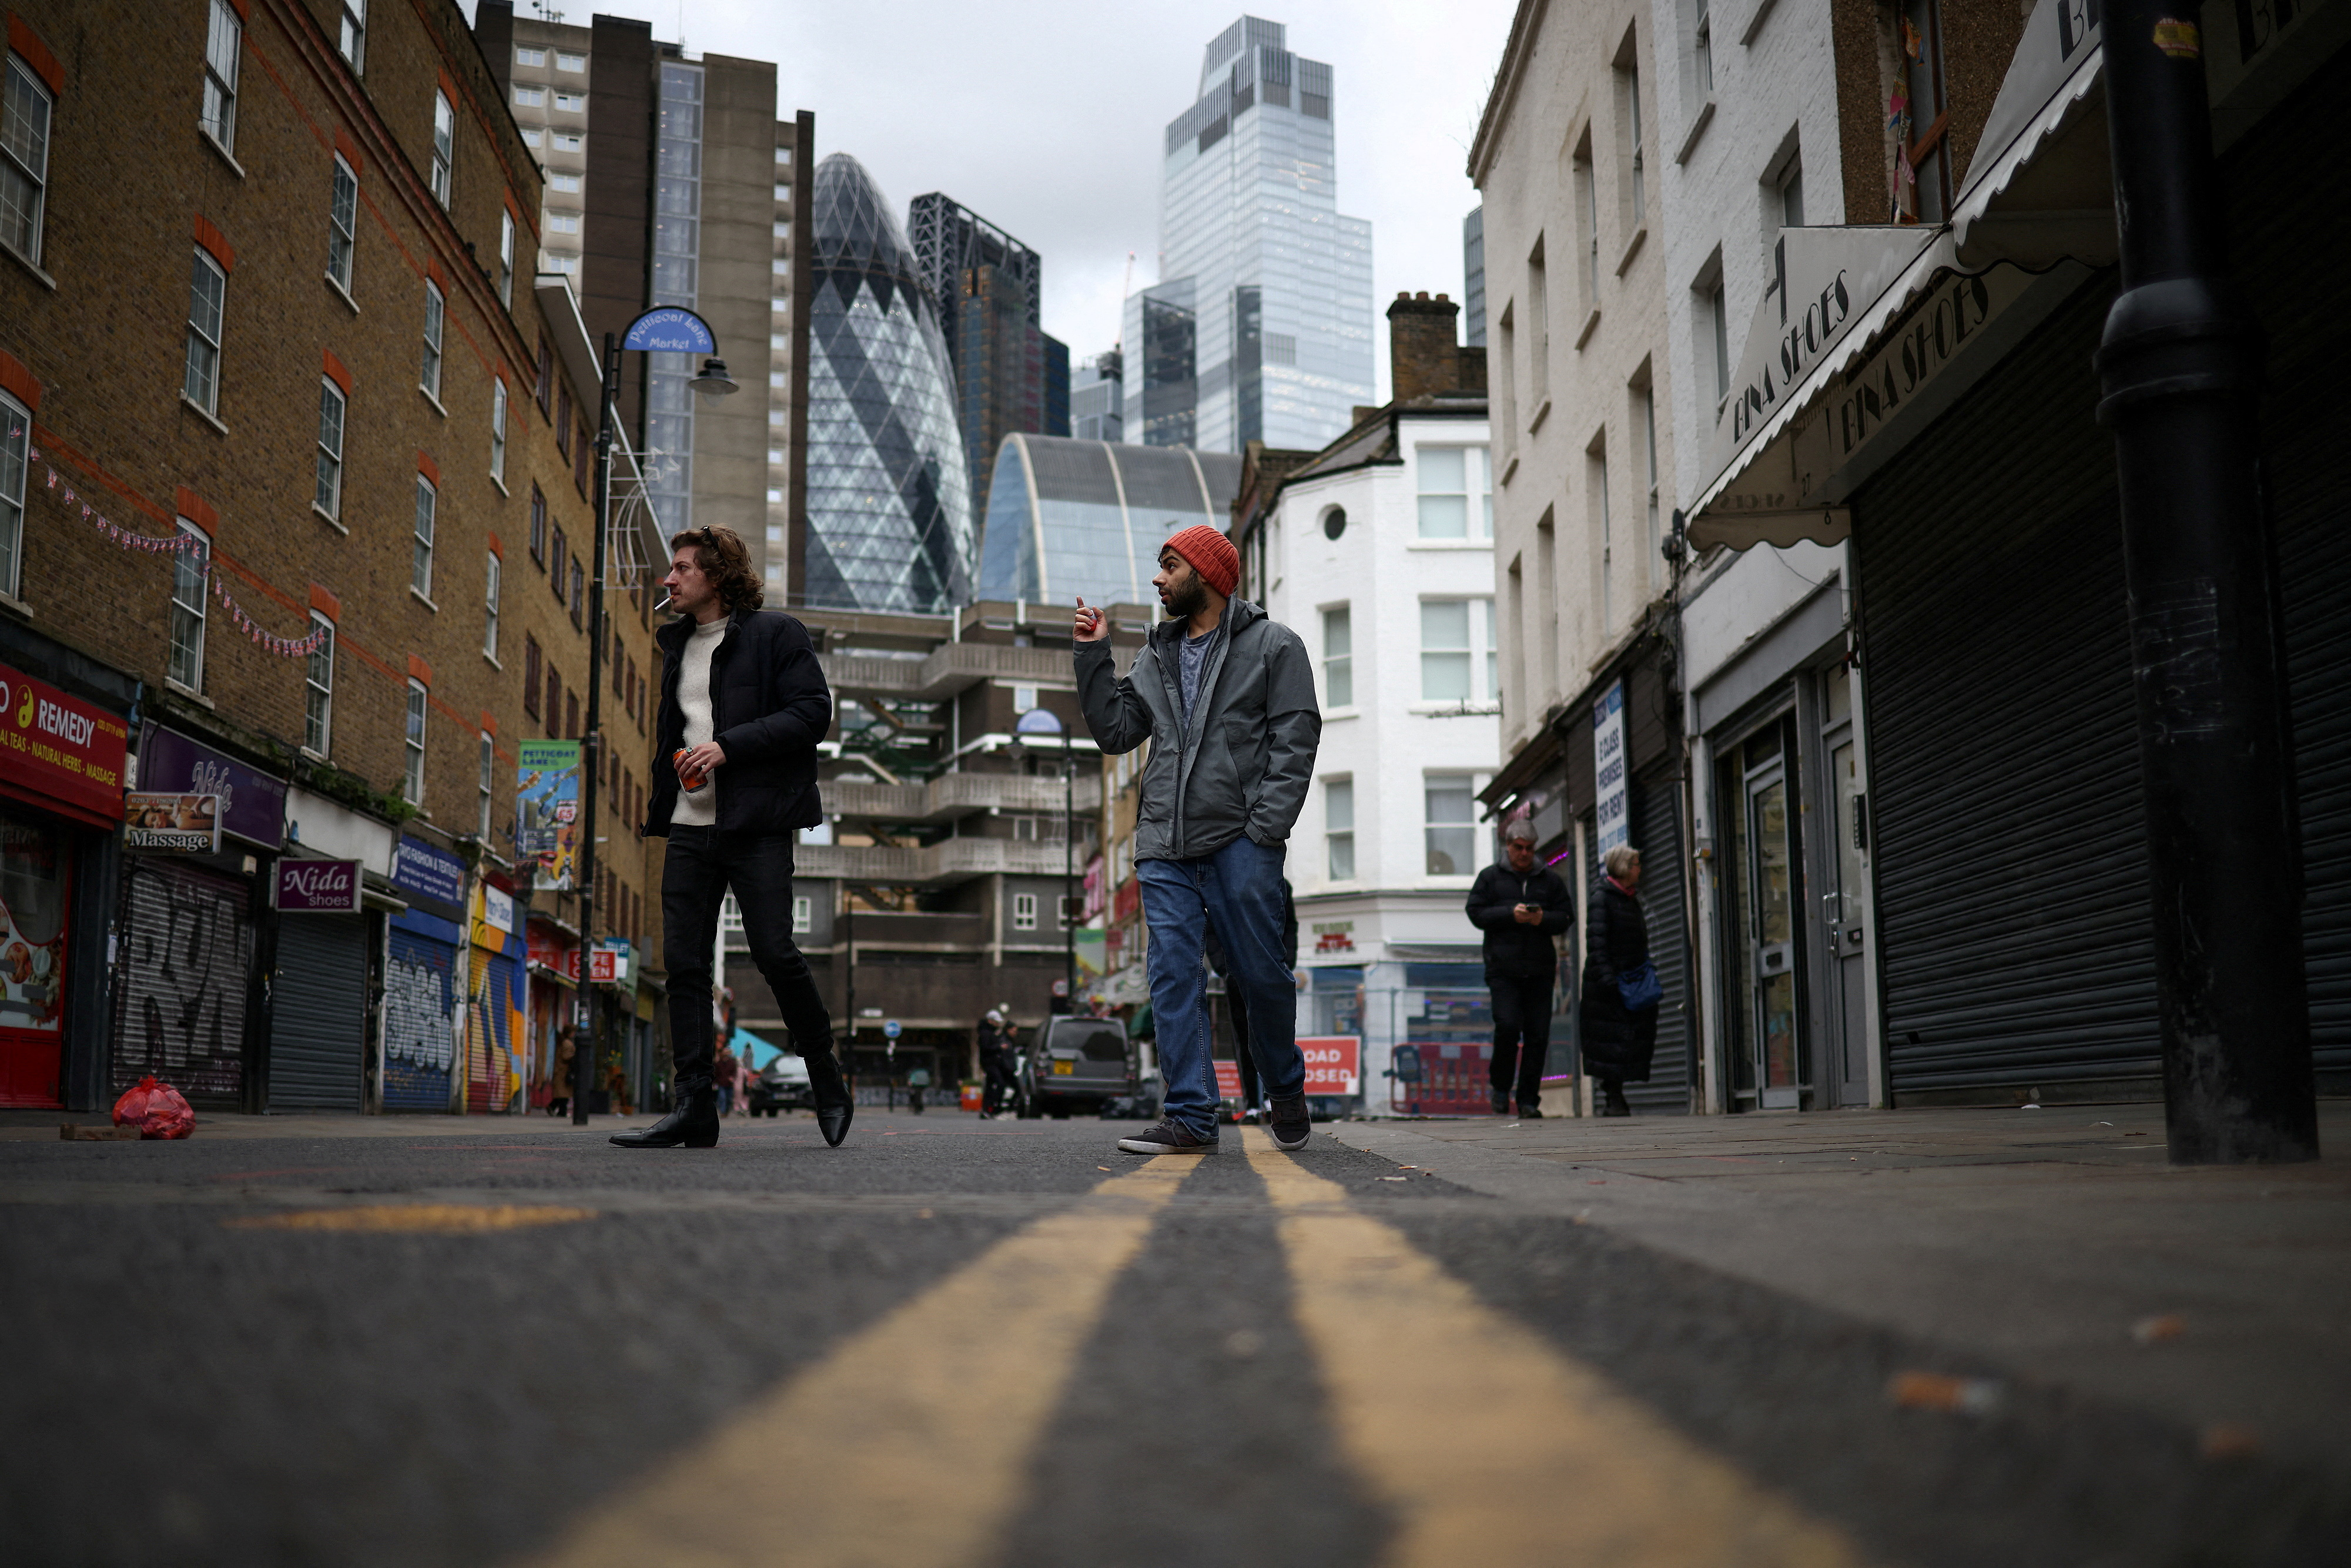 People walk past shops, with the City of London financial district in the background, in London, Britain